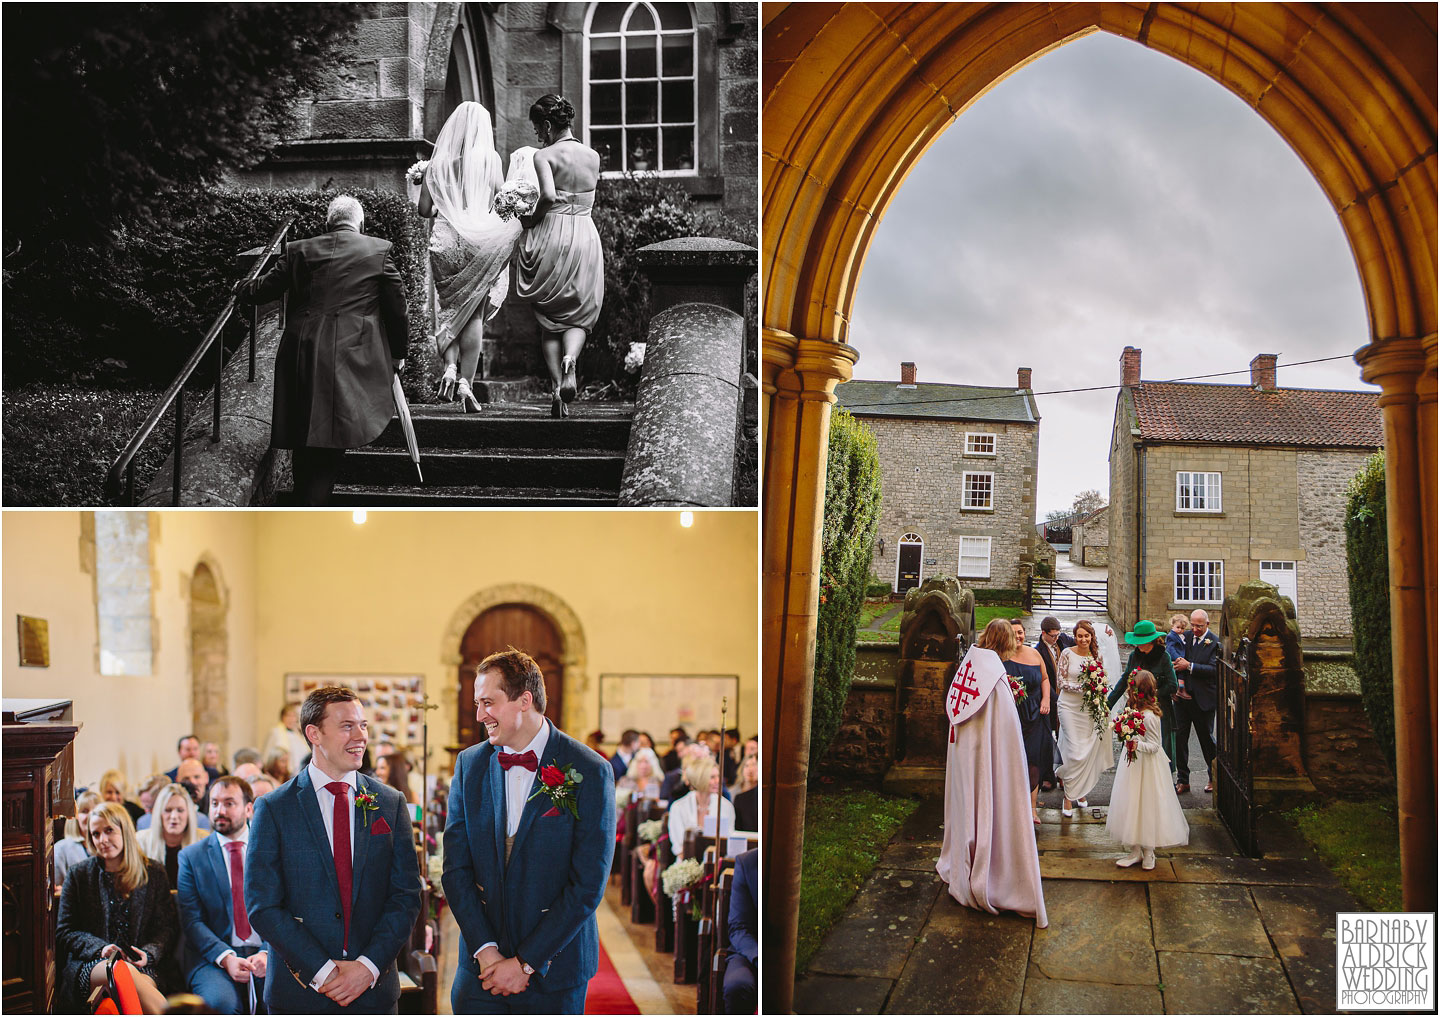 The arrival of the bride at a church in Denton, Amazing Yorkshire Wedding Photos, Best Yorkshire Wedding Photos 2018